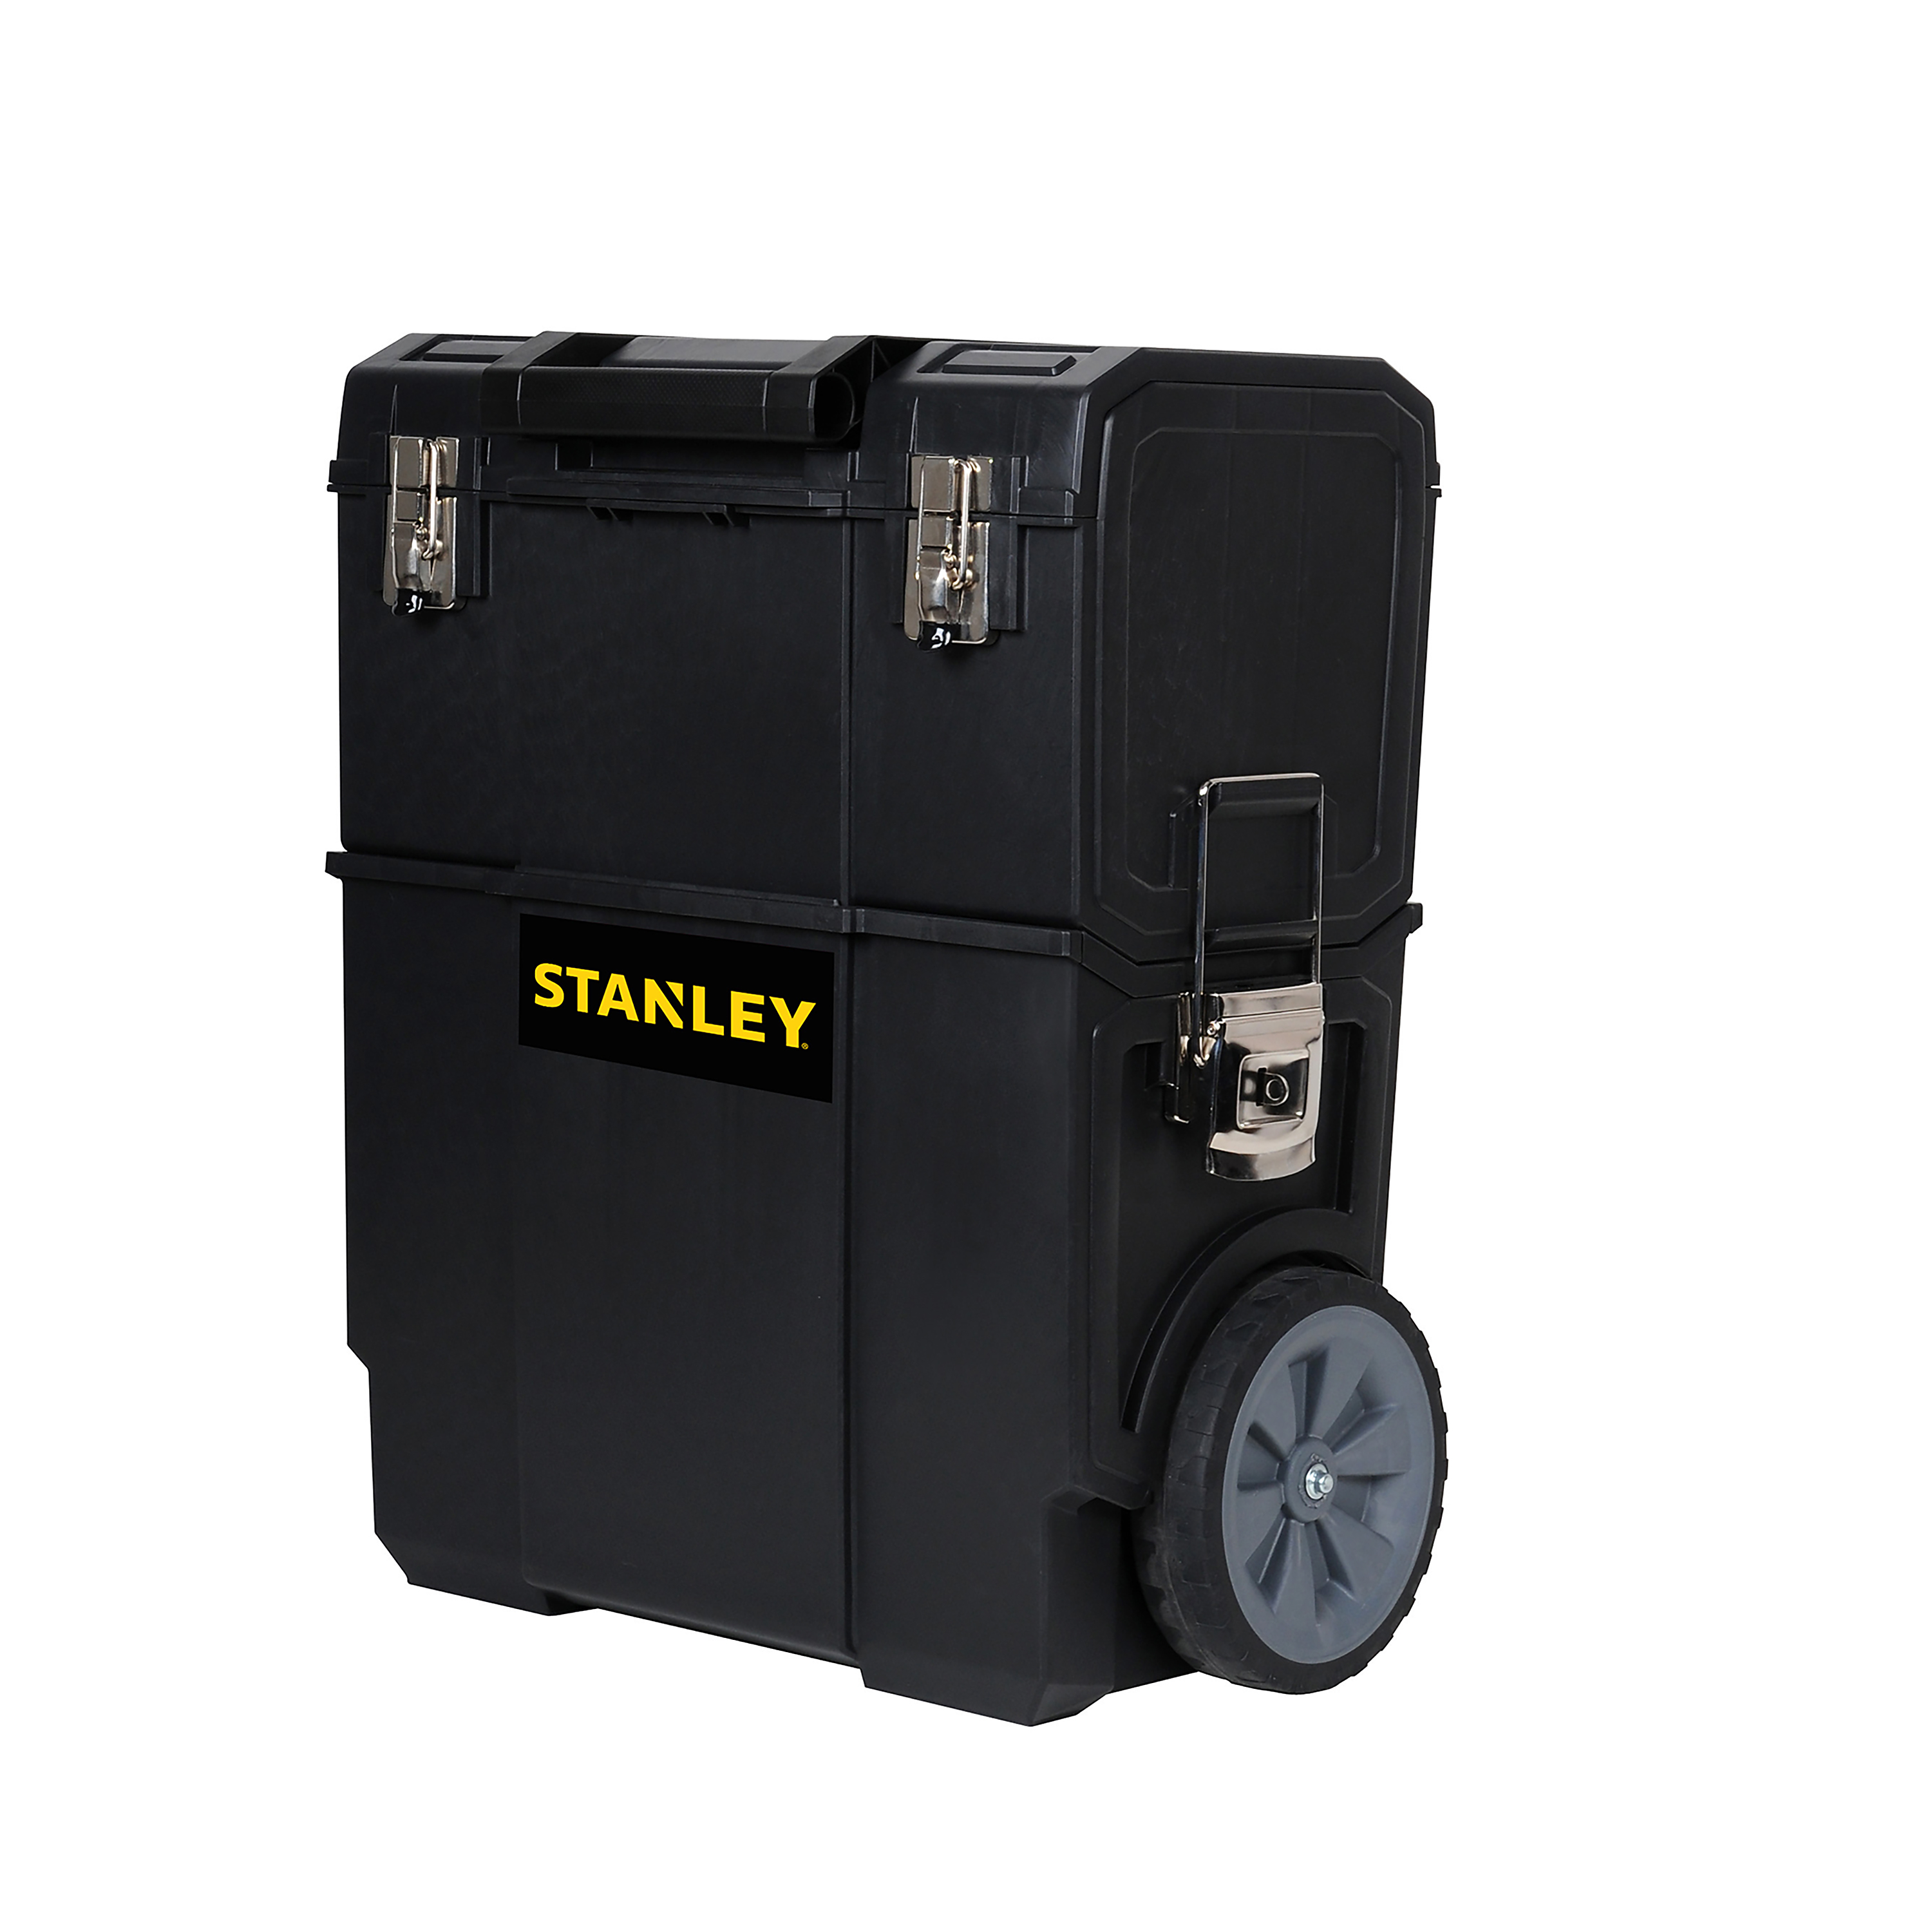 STANLEY STST18612W 2-IN-1 Mobile Work Center Plus Flat Top - image 2 of 4